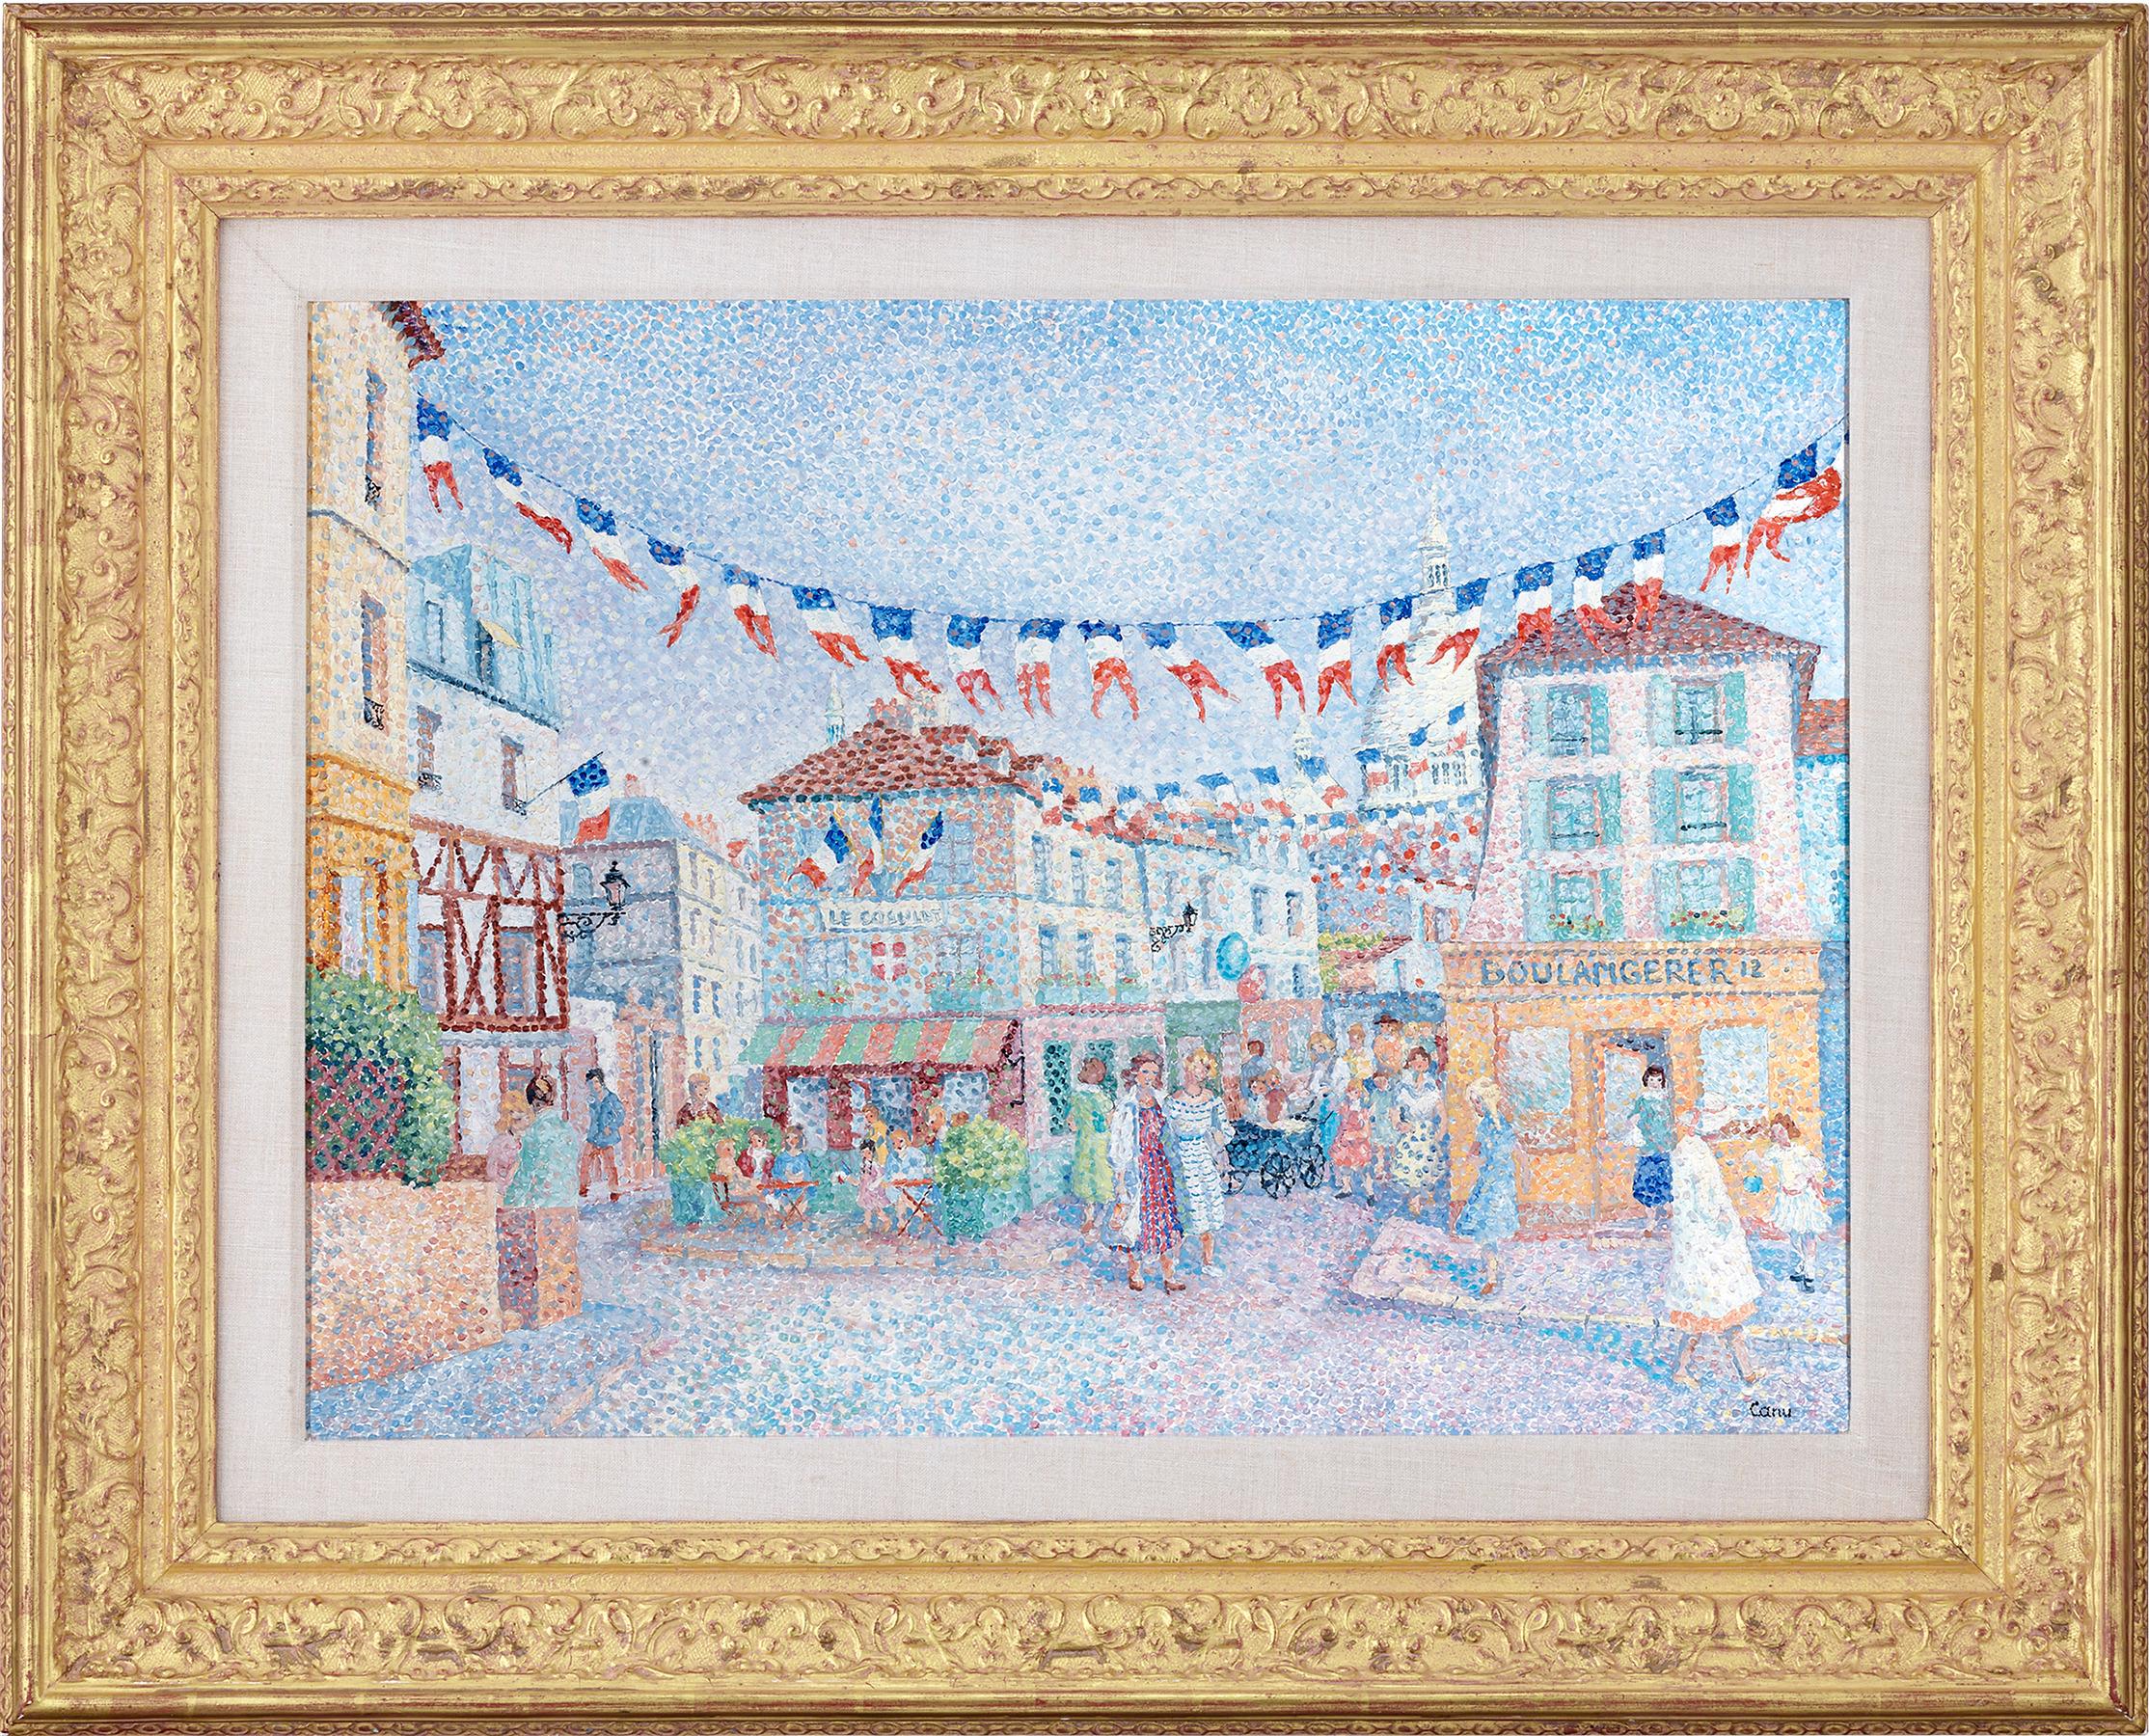 14 juillet, Montmartre (July 14, Montmartre) - Painting by Yvonne Canu